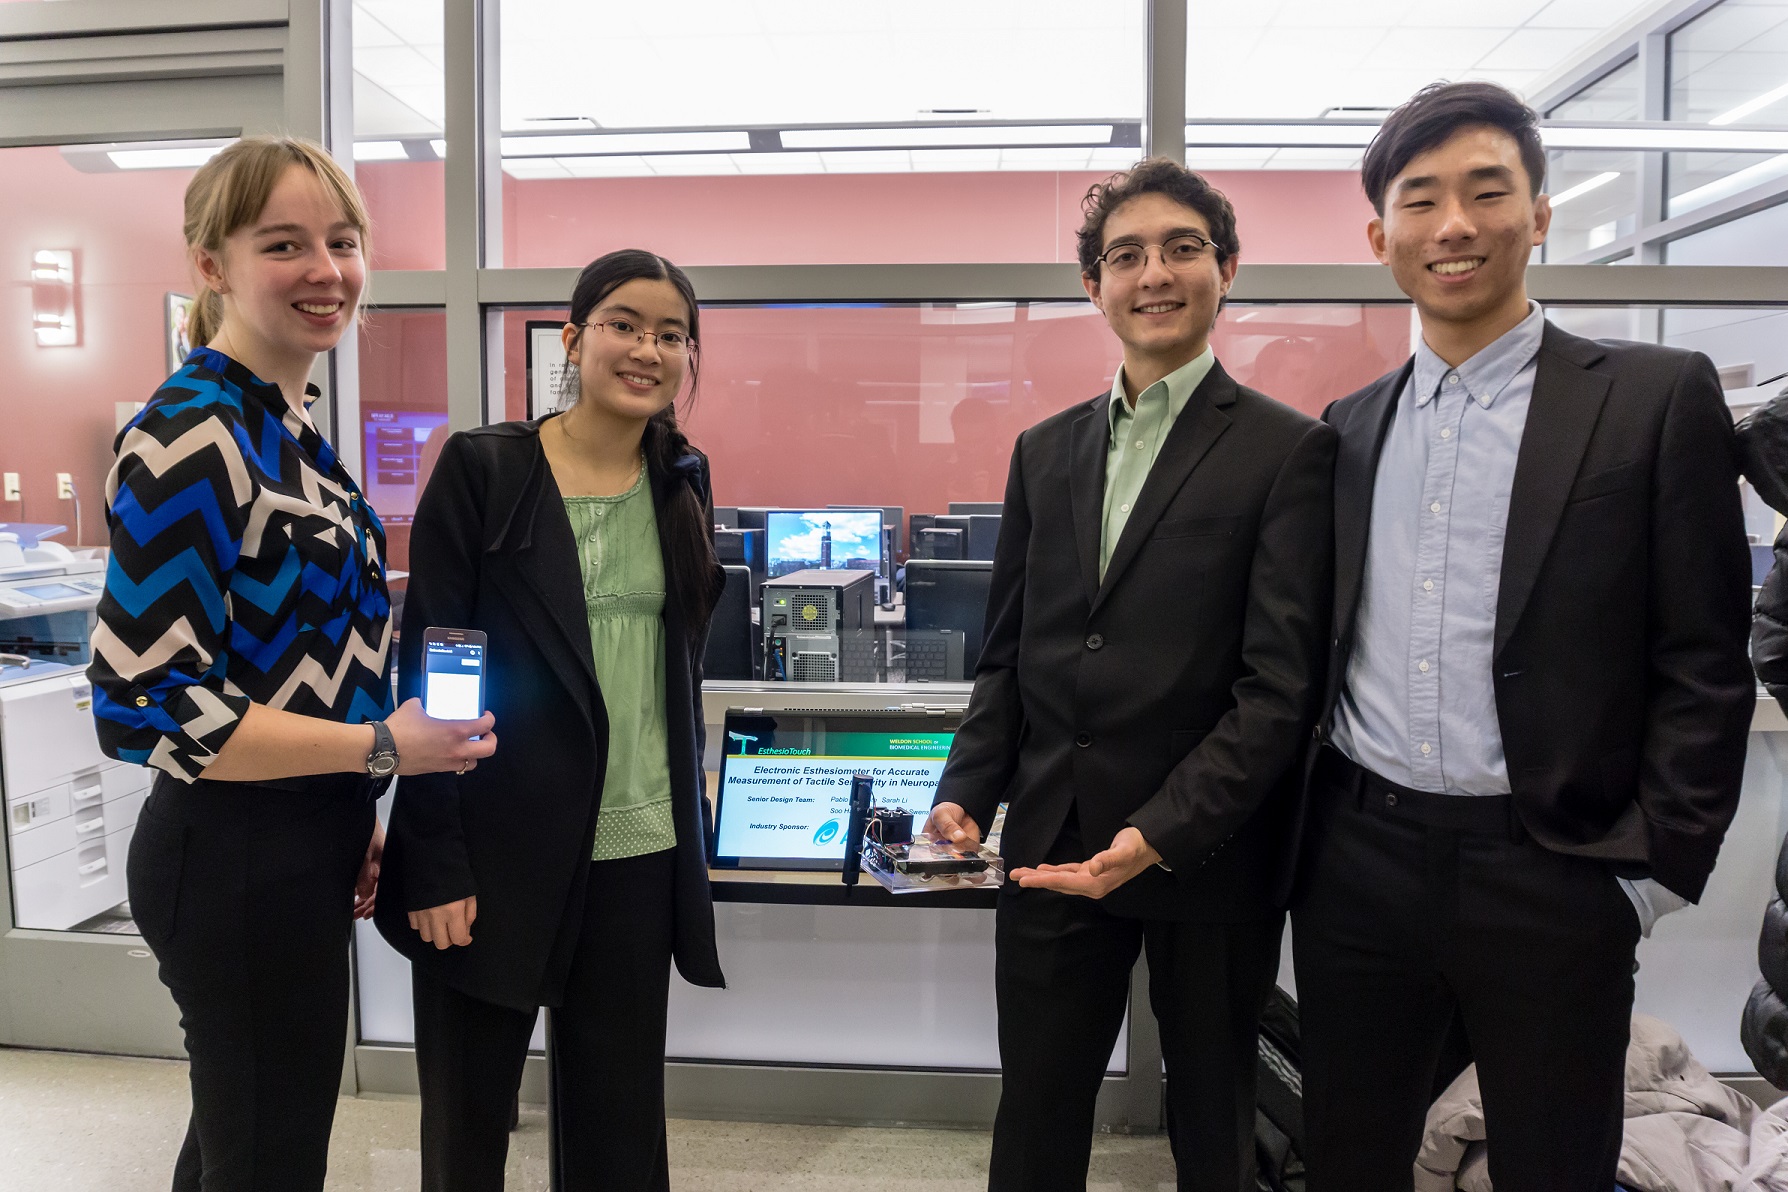 Rachael Swenson, Sarah Li, Pablo Argote, and Soo Han Soon worked with mentors at Axogen to develop a diagnostic tool that measures tactile sensitivity for their senior design project.